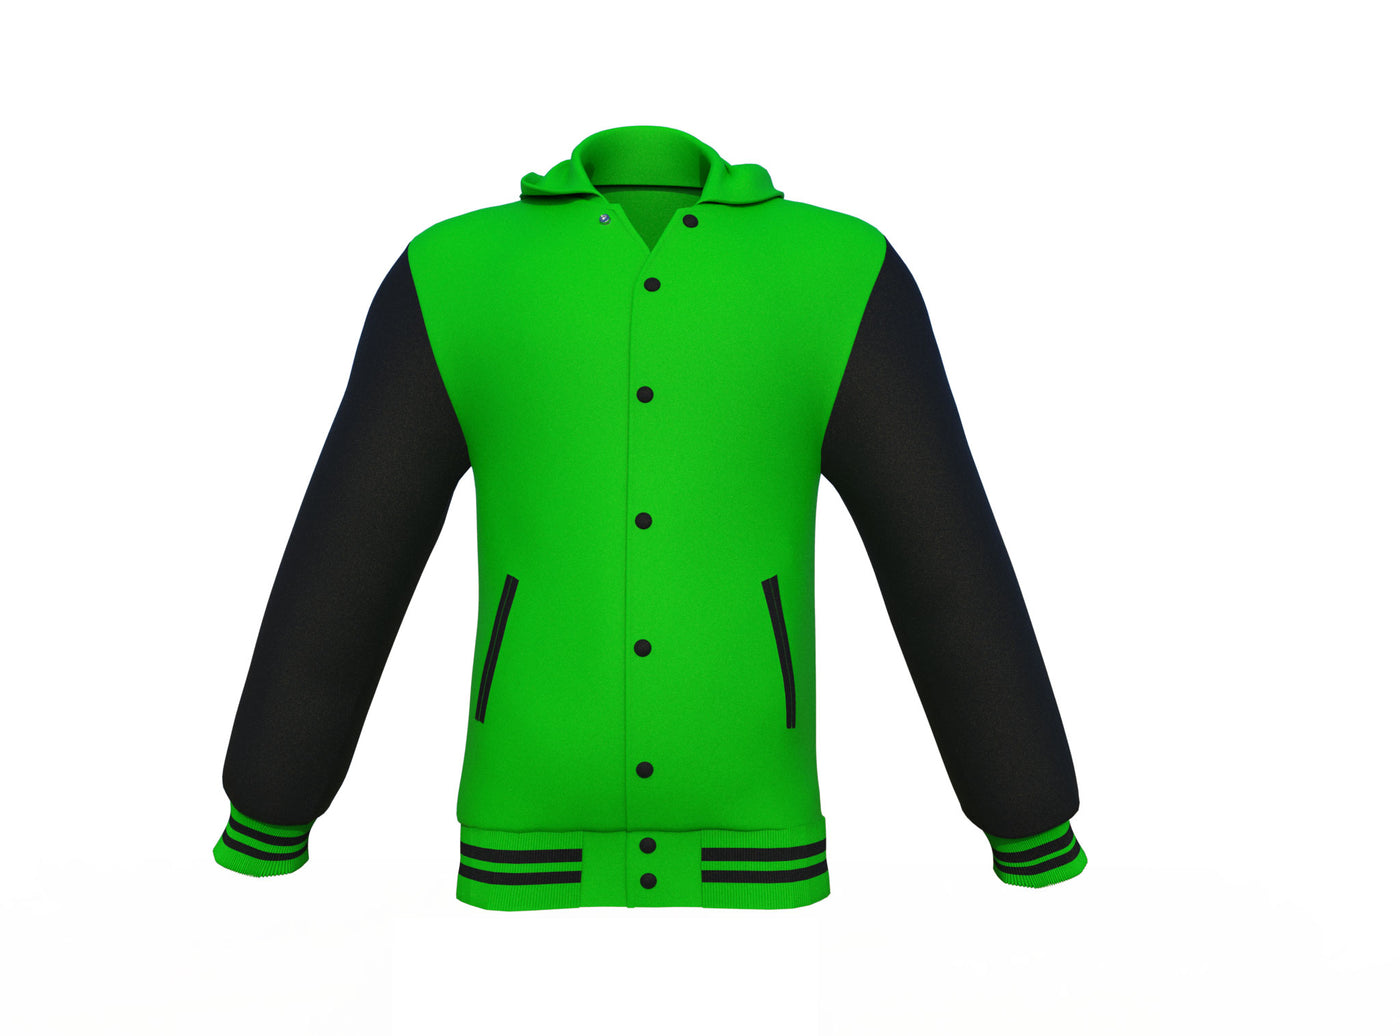 Perfect Light Green Varsity Letterman Jacket with Black Sleeves